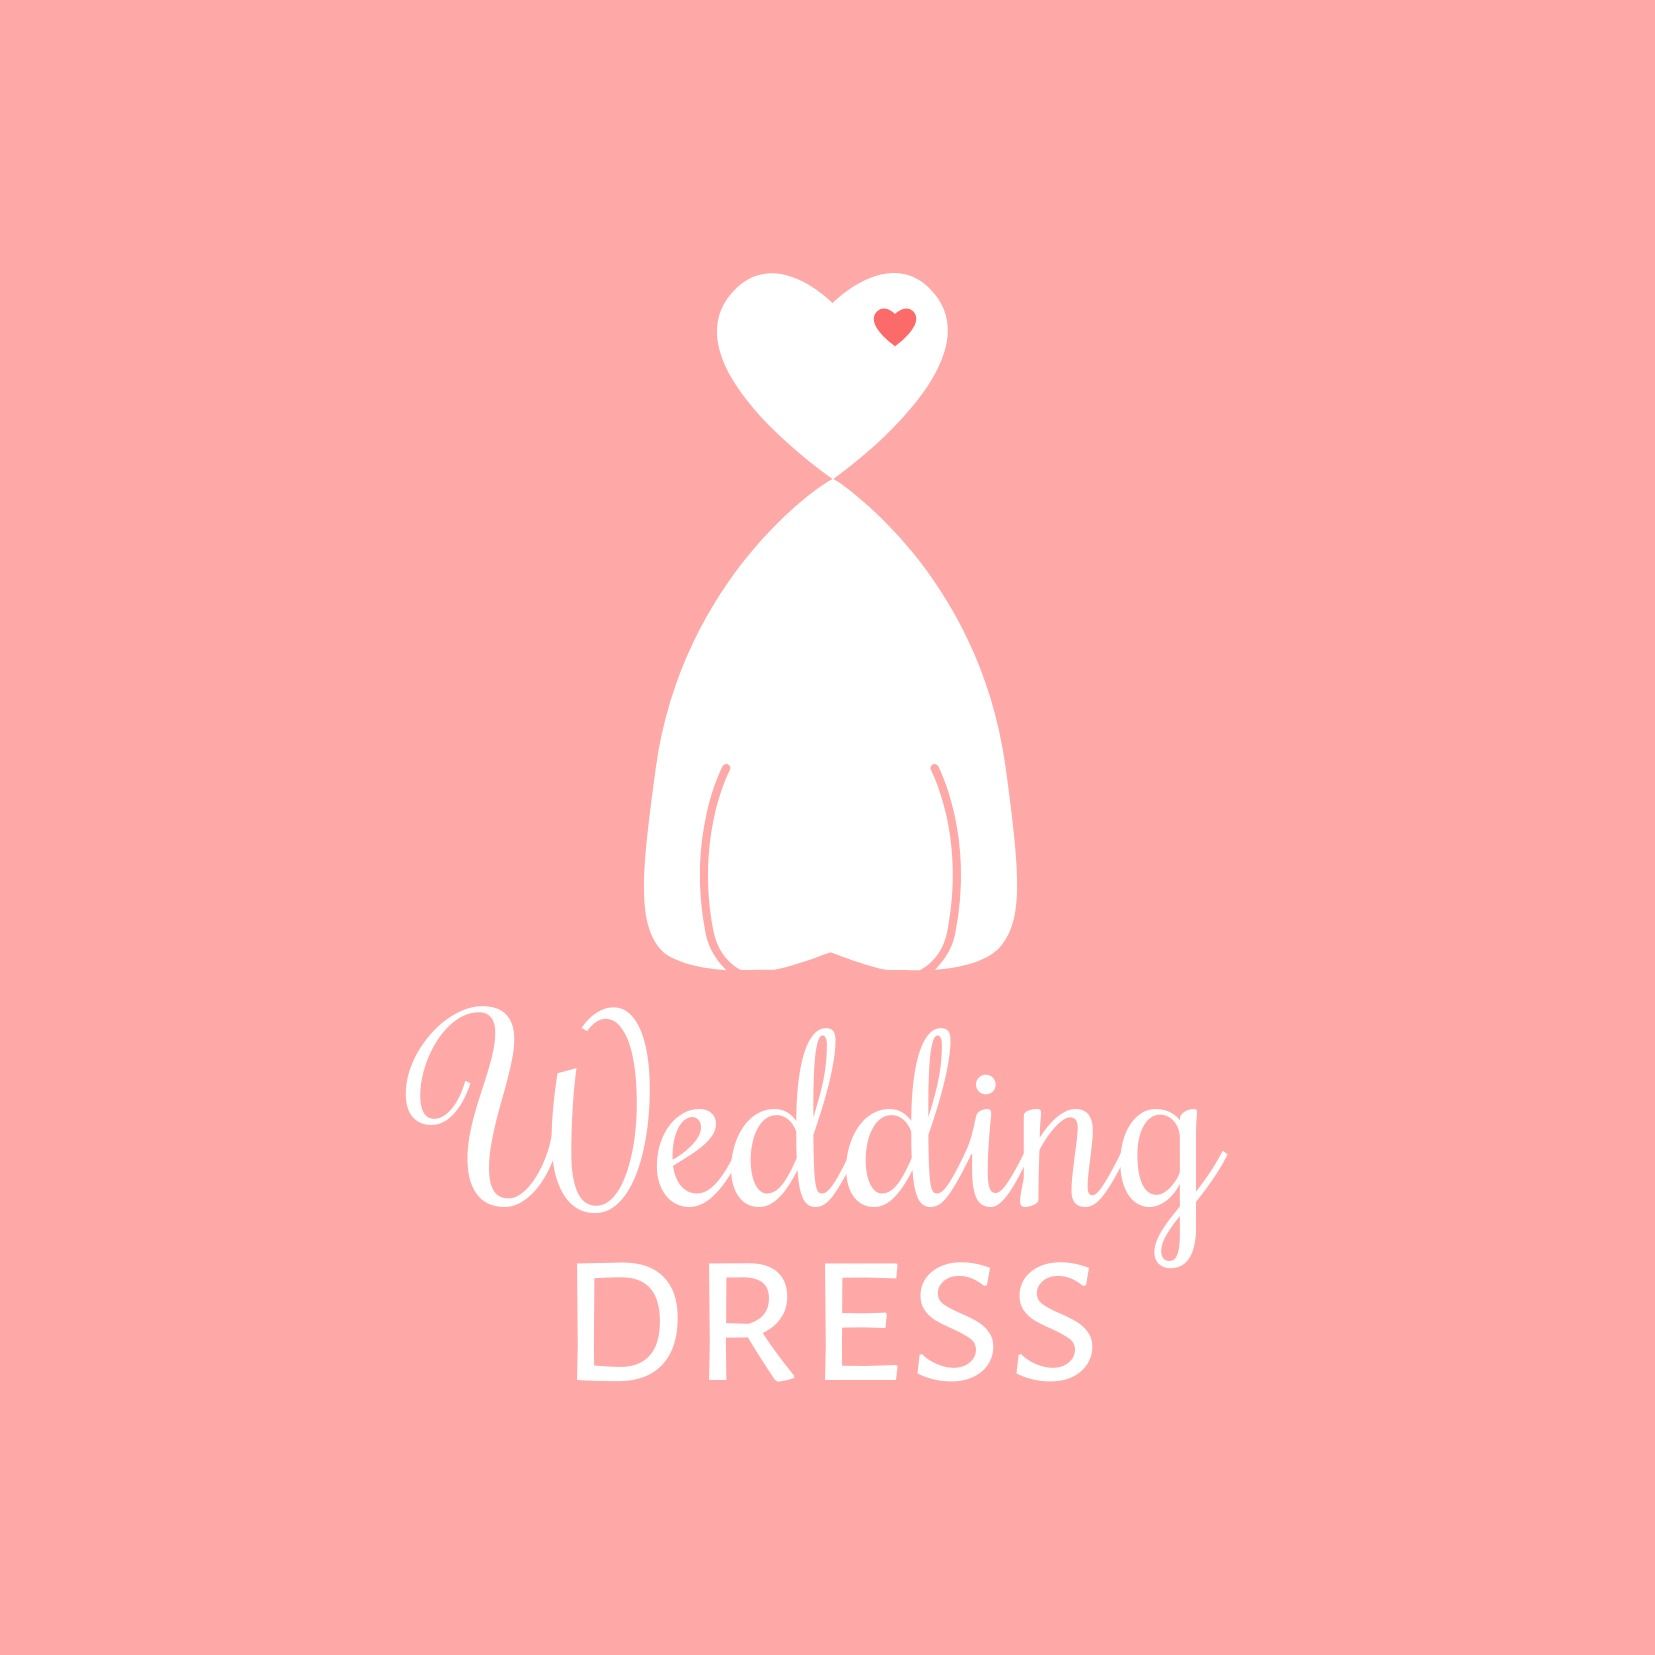 Wedding dress logo with heart shaped bodice - Stylish and refined Rochester font - Image